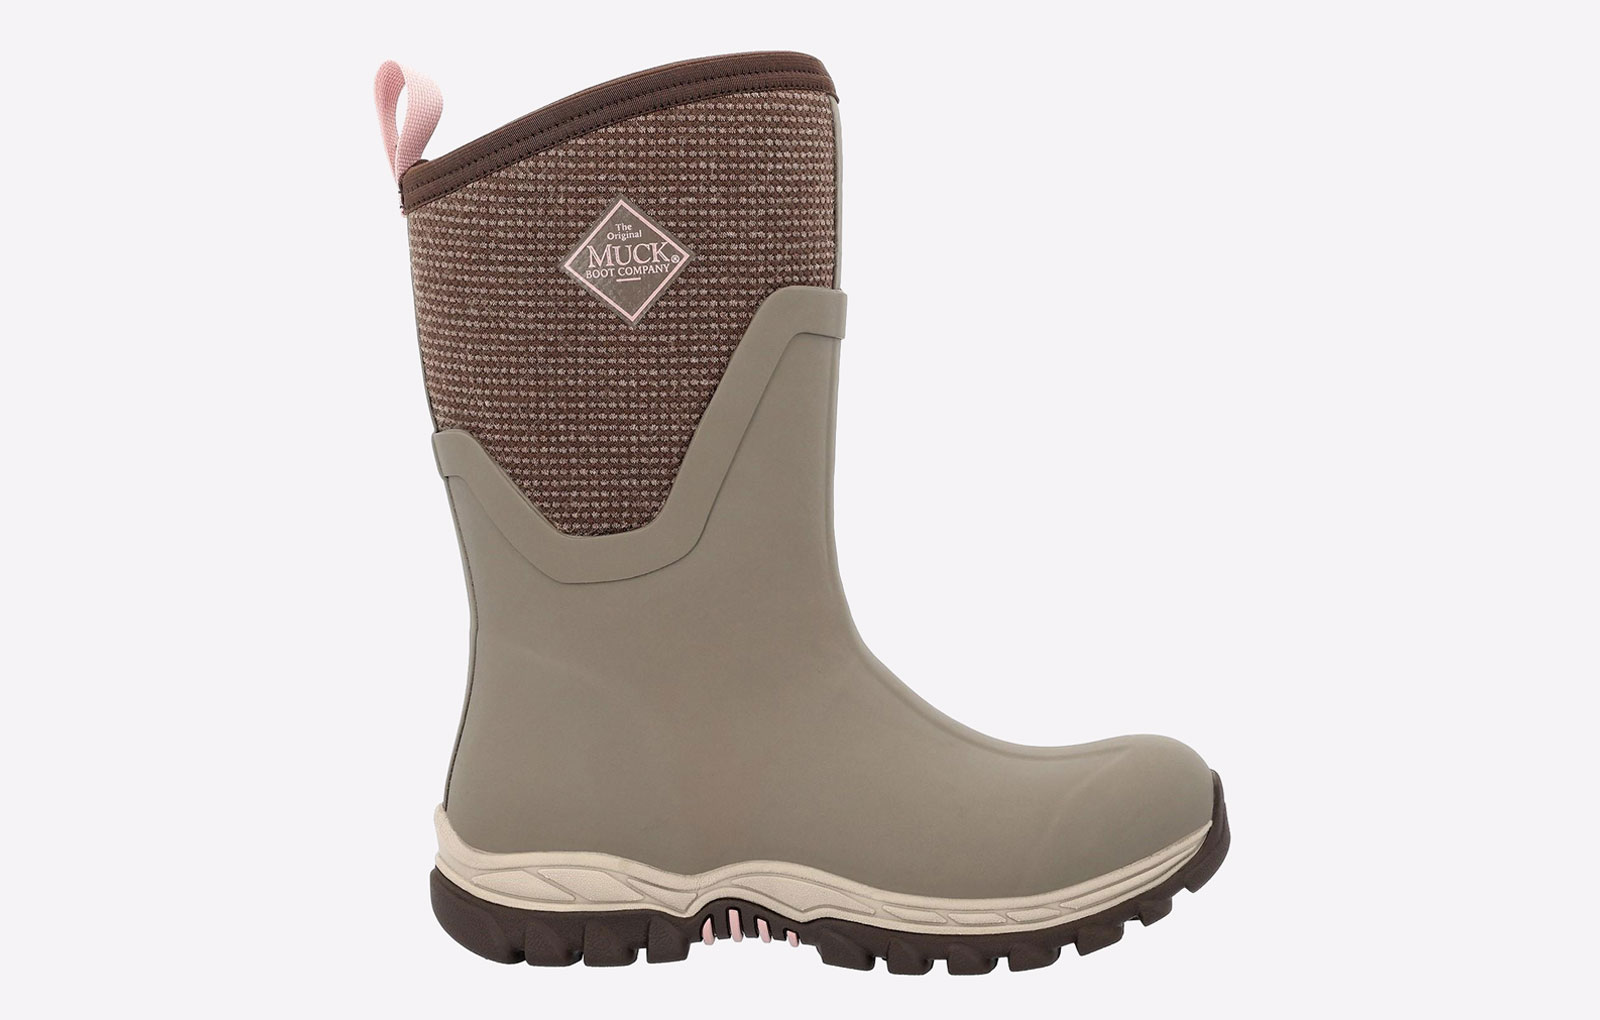 Muck Boots Arctic Wellington Boots Womens - GRD-24839-66604-07